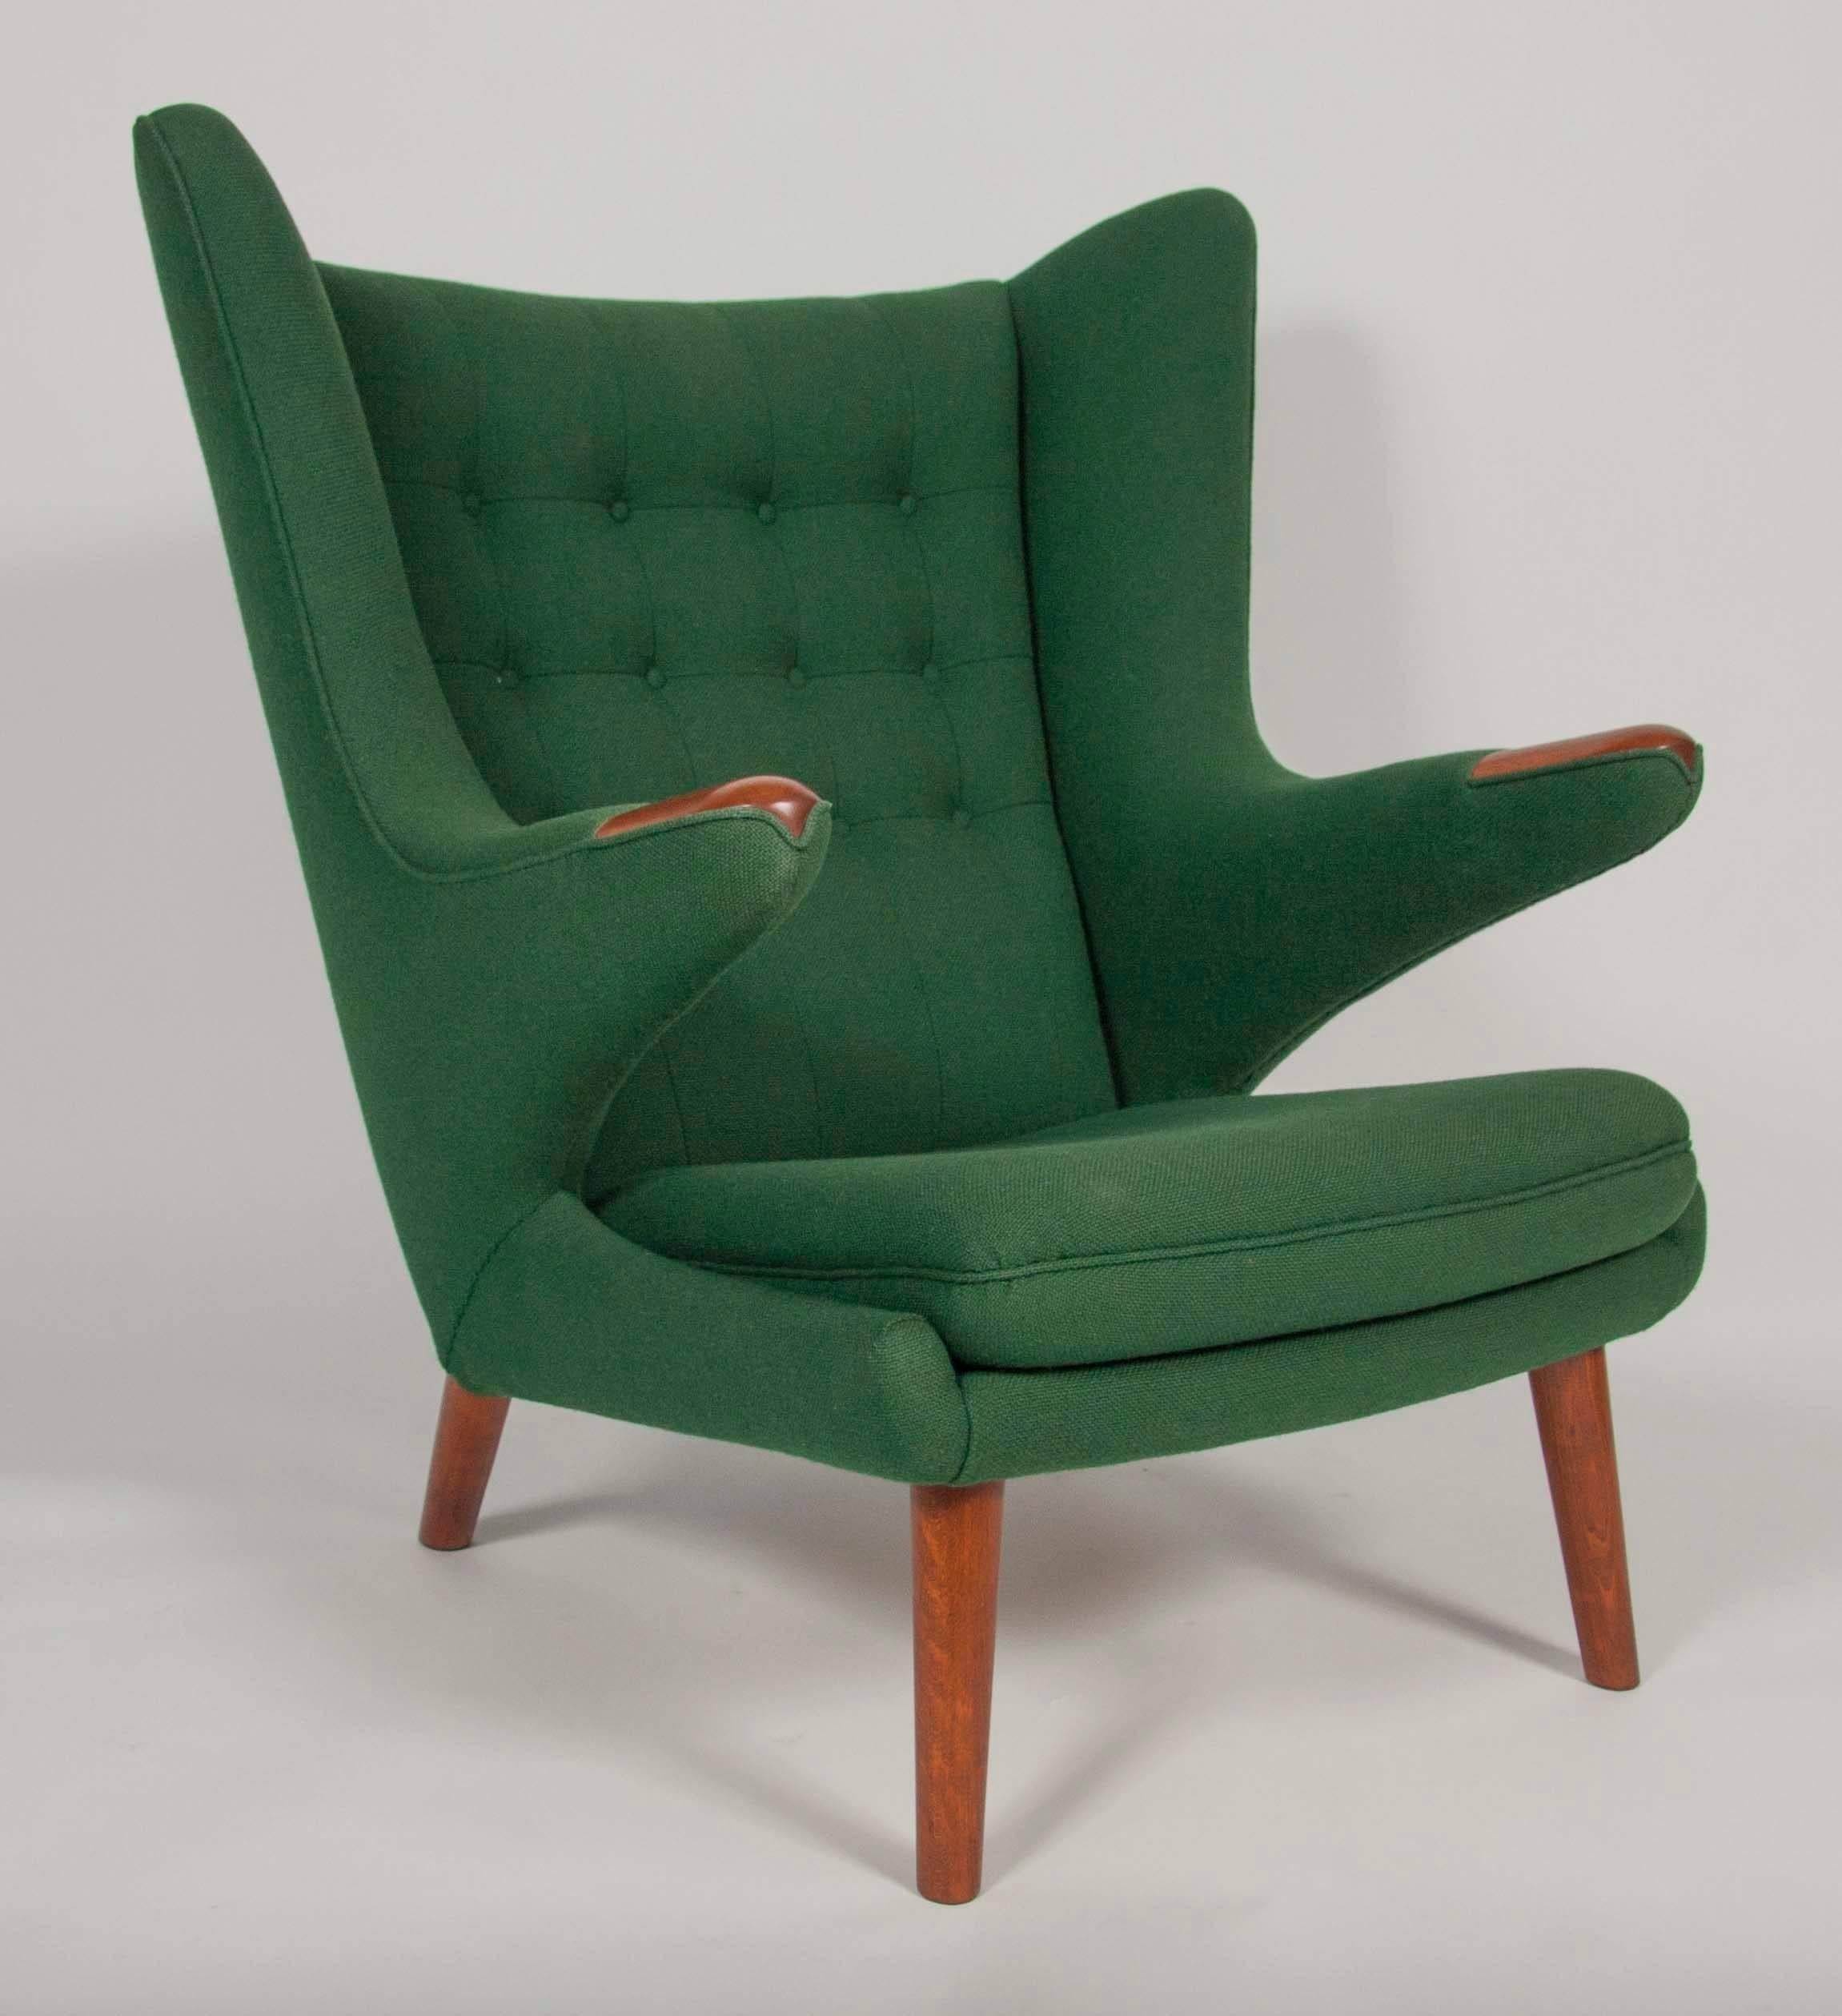 For your consideration is a pair of Hans Wegner for AP Stolen Papa Bear chairs, reupholstered in emerald green. These chairs are icons of Danish Modern design, from one of the movement’s masters. The chairs are in excellent condition and go well